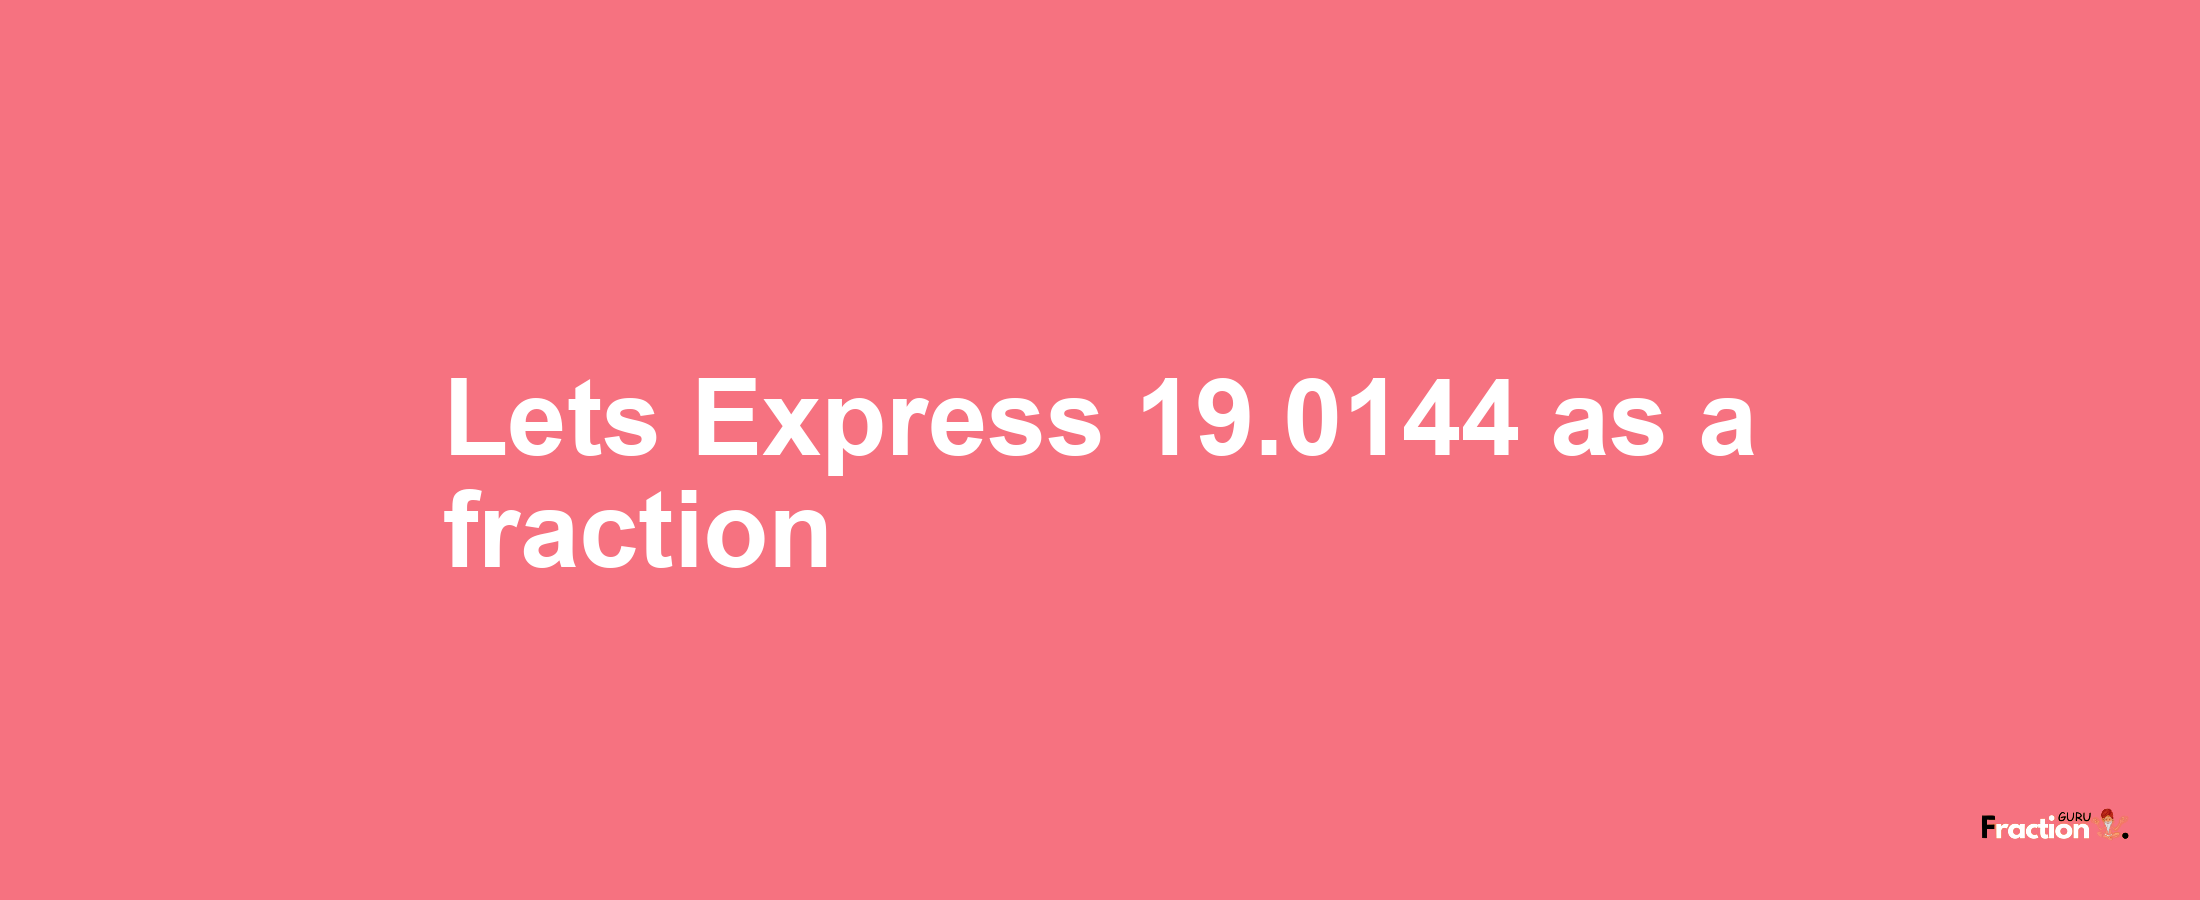 Lets Express 19.0144 as afraction